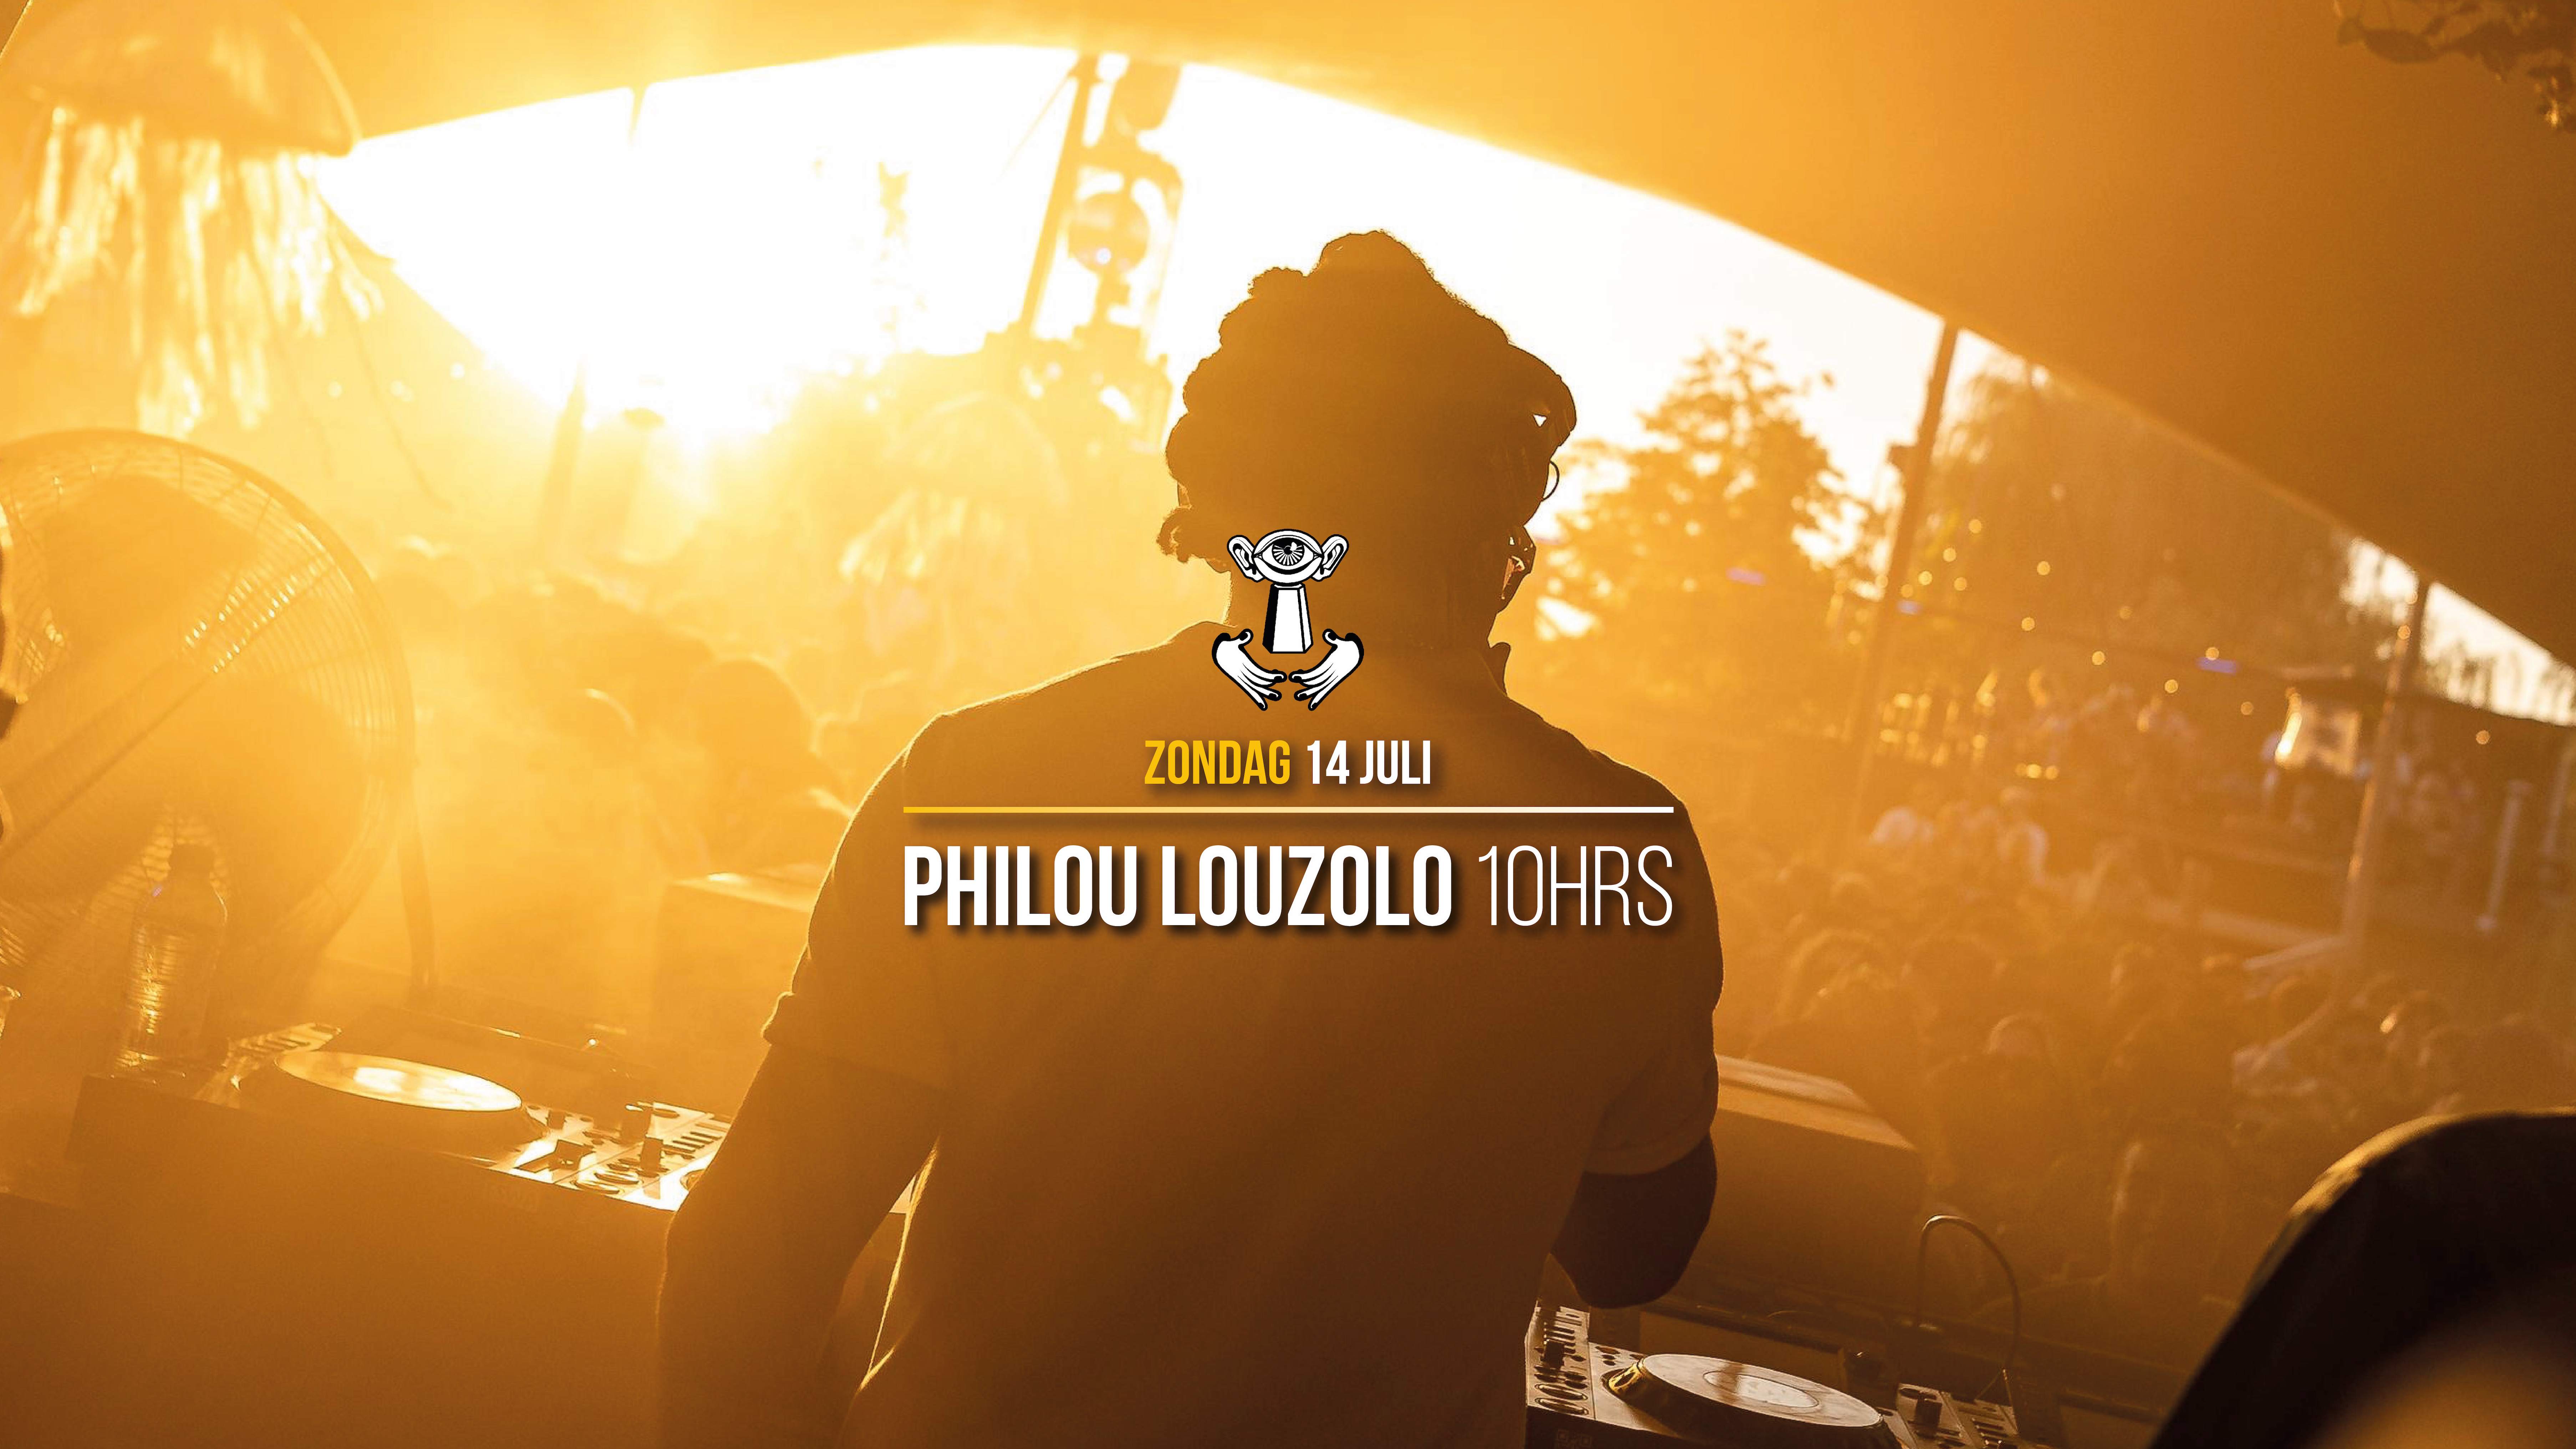 14 JULI - Thuishaven with Philou Louzolo 10HRS - フライヤー表